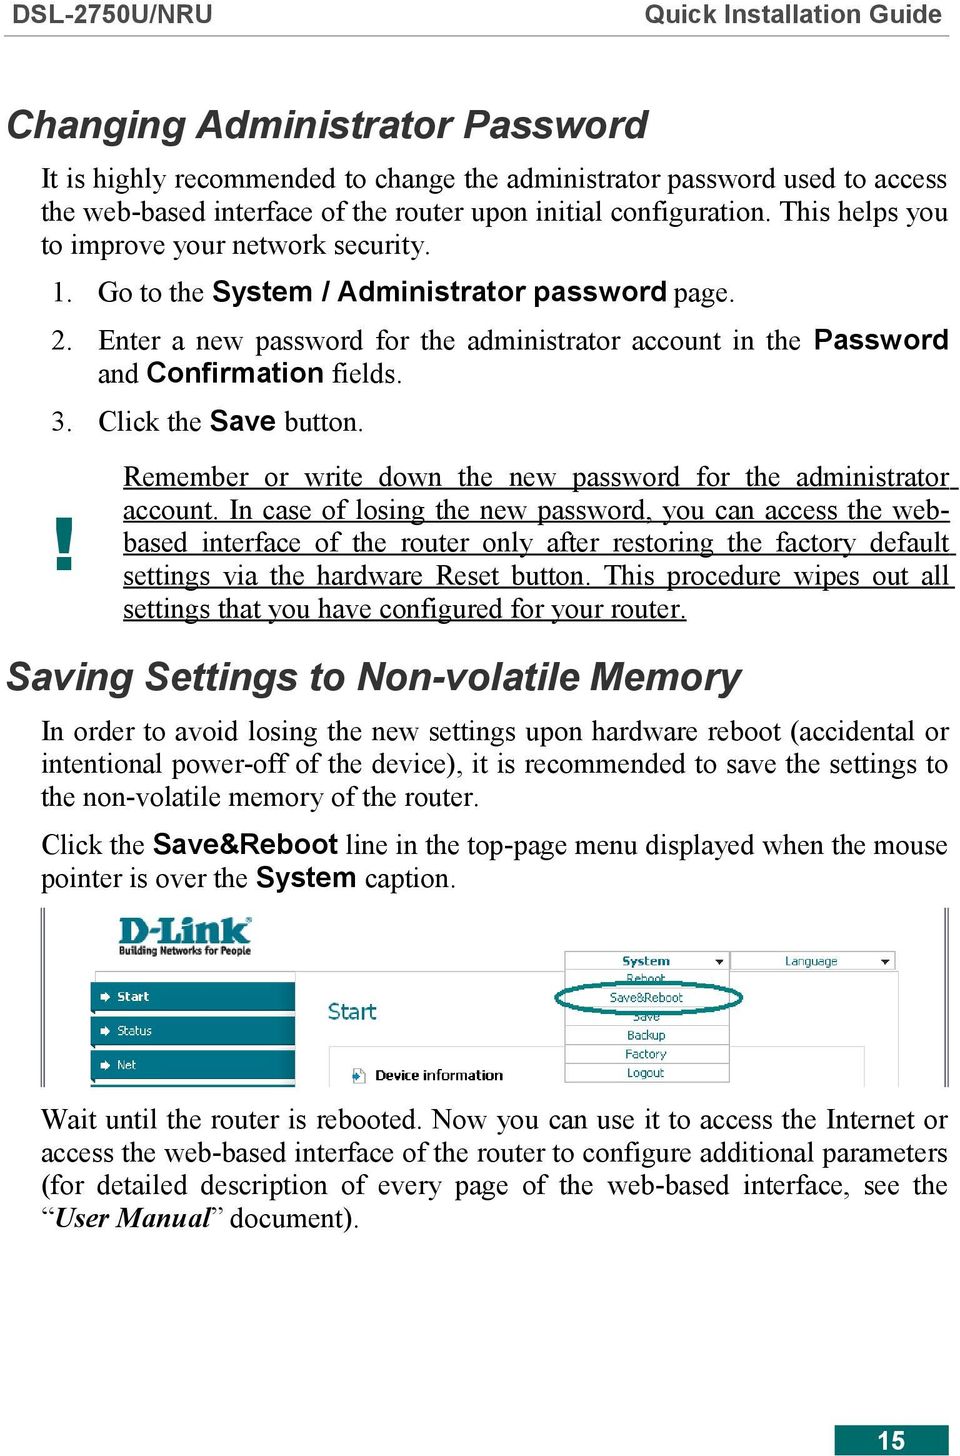 Click the Save button.! Remember or write down the new password for the administrator account.